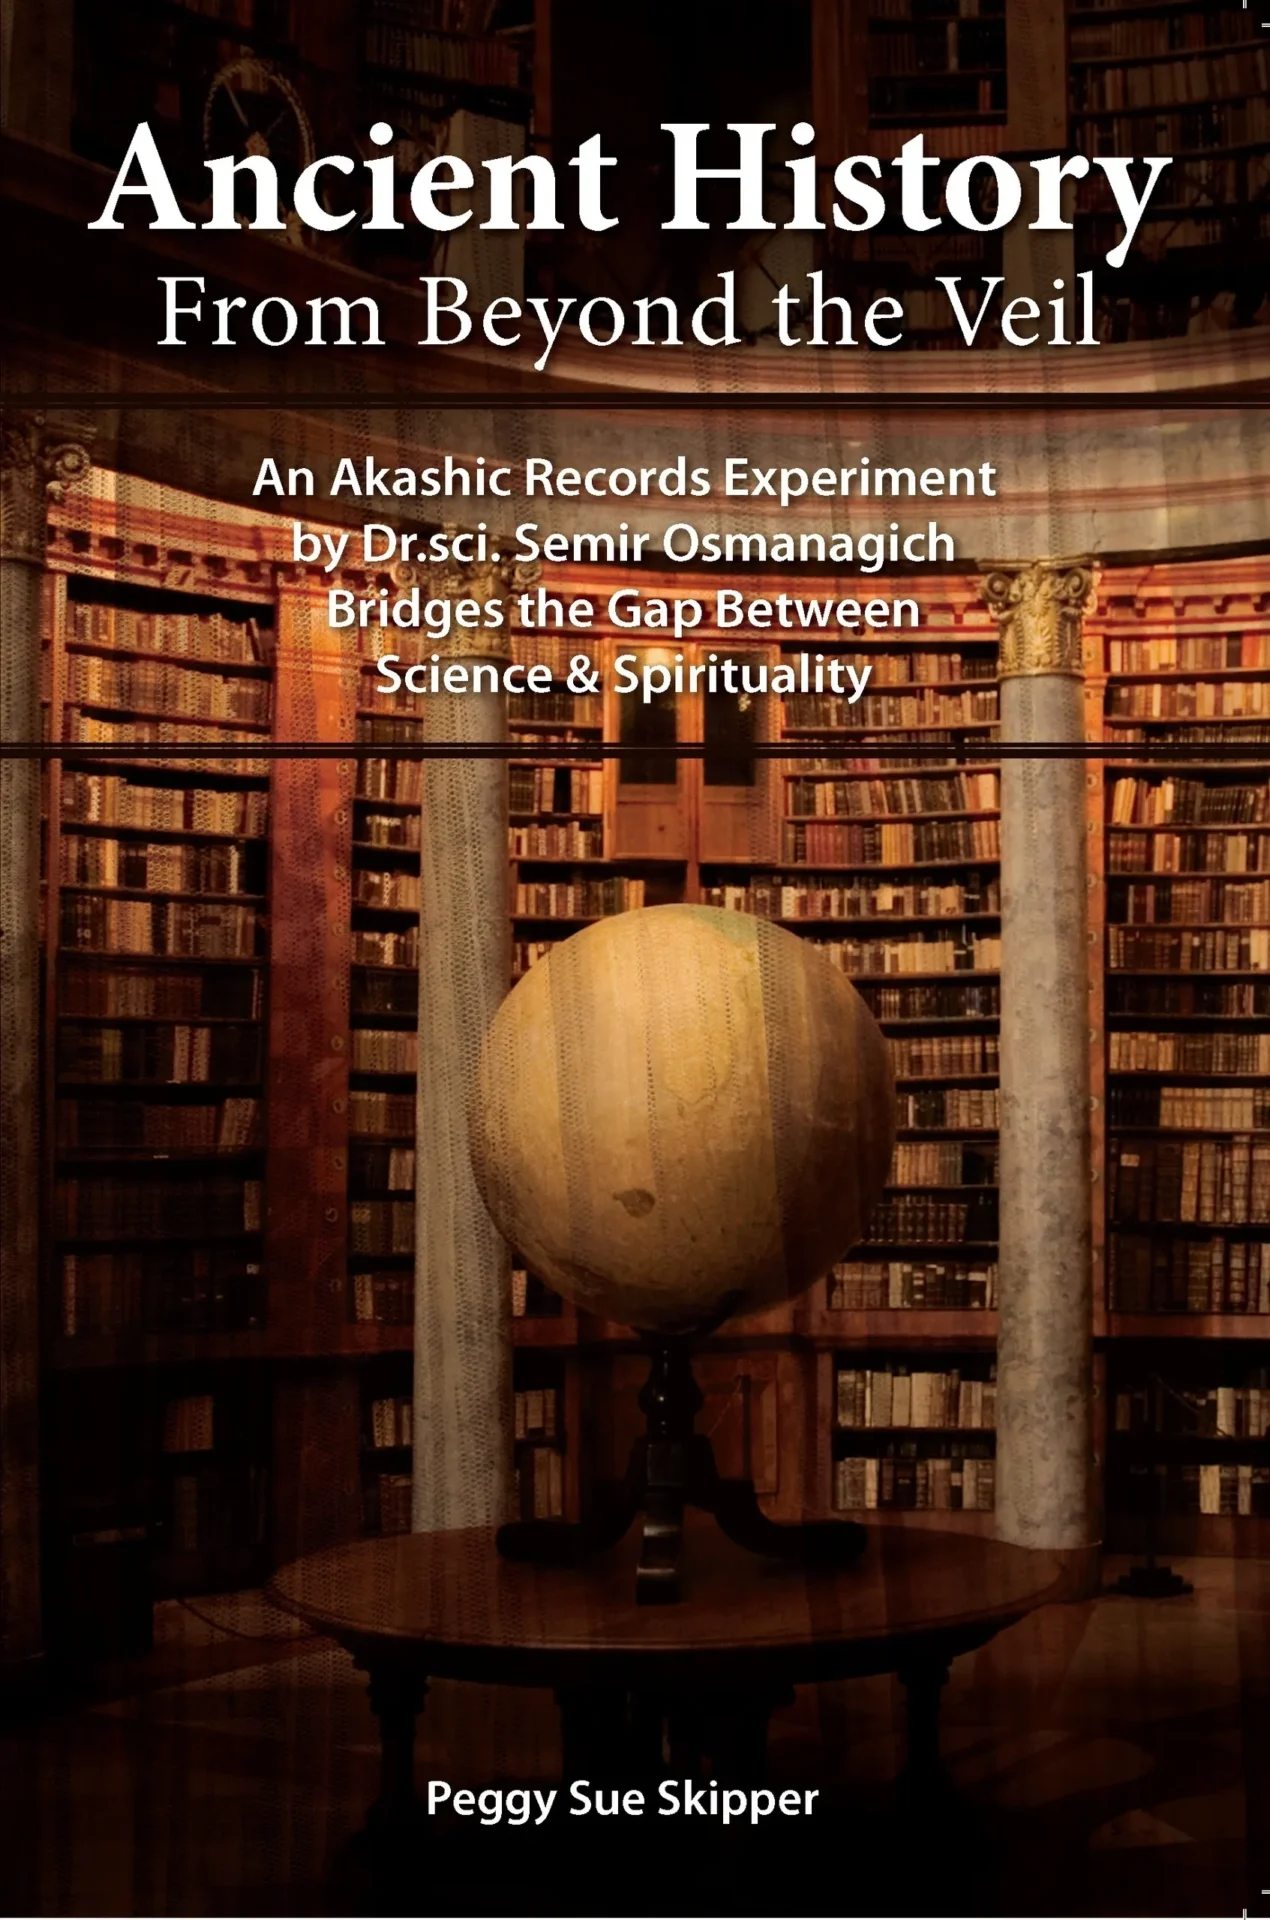 A book cover with an image of a globe and books.